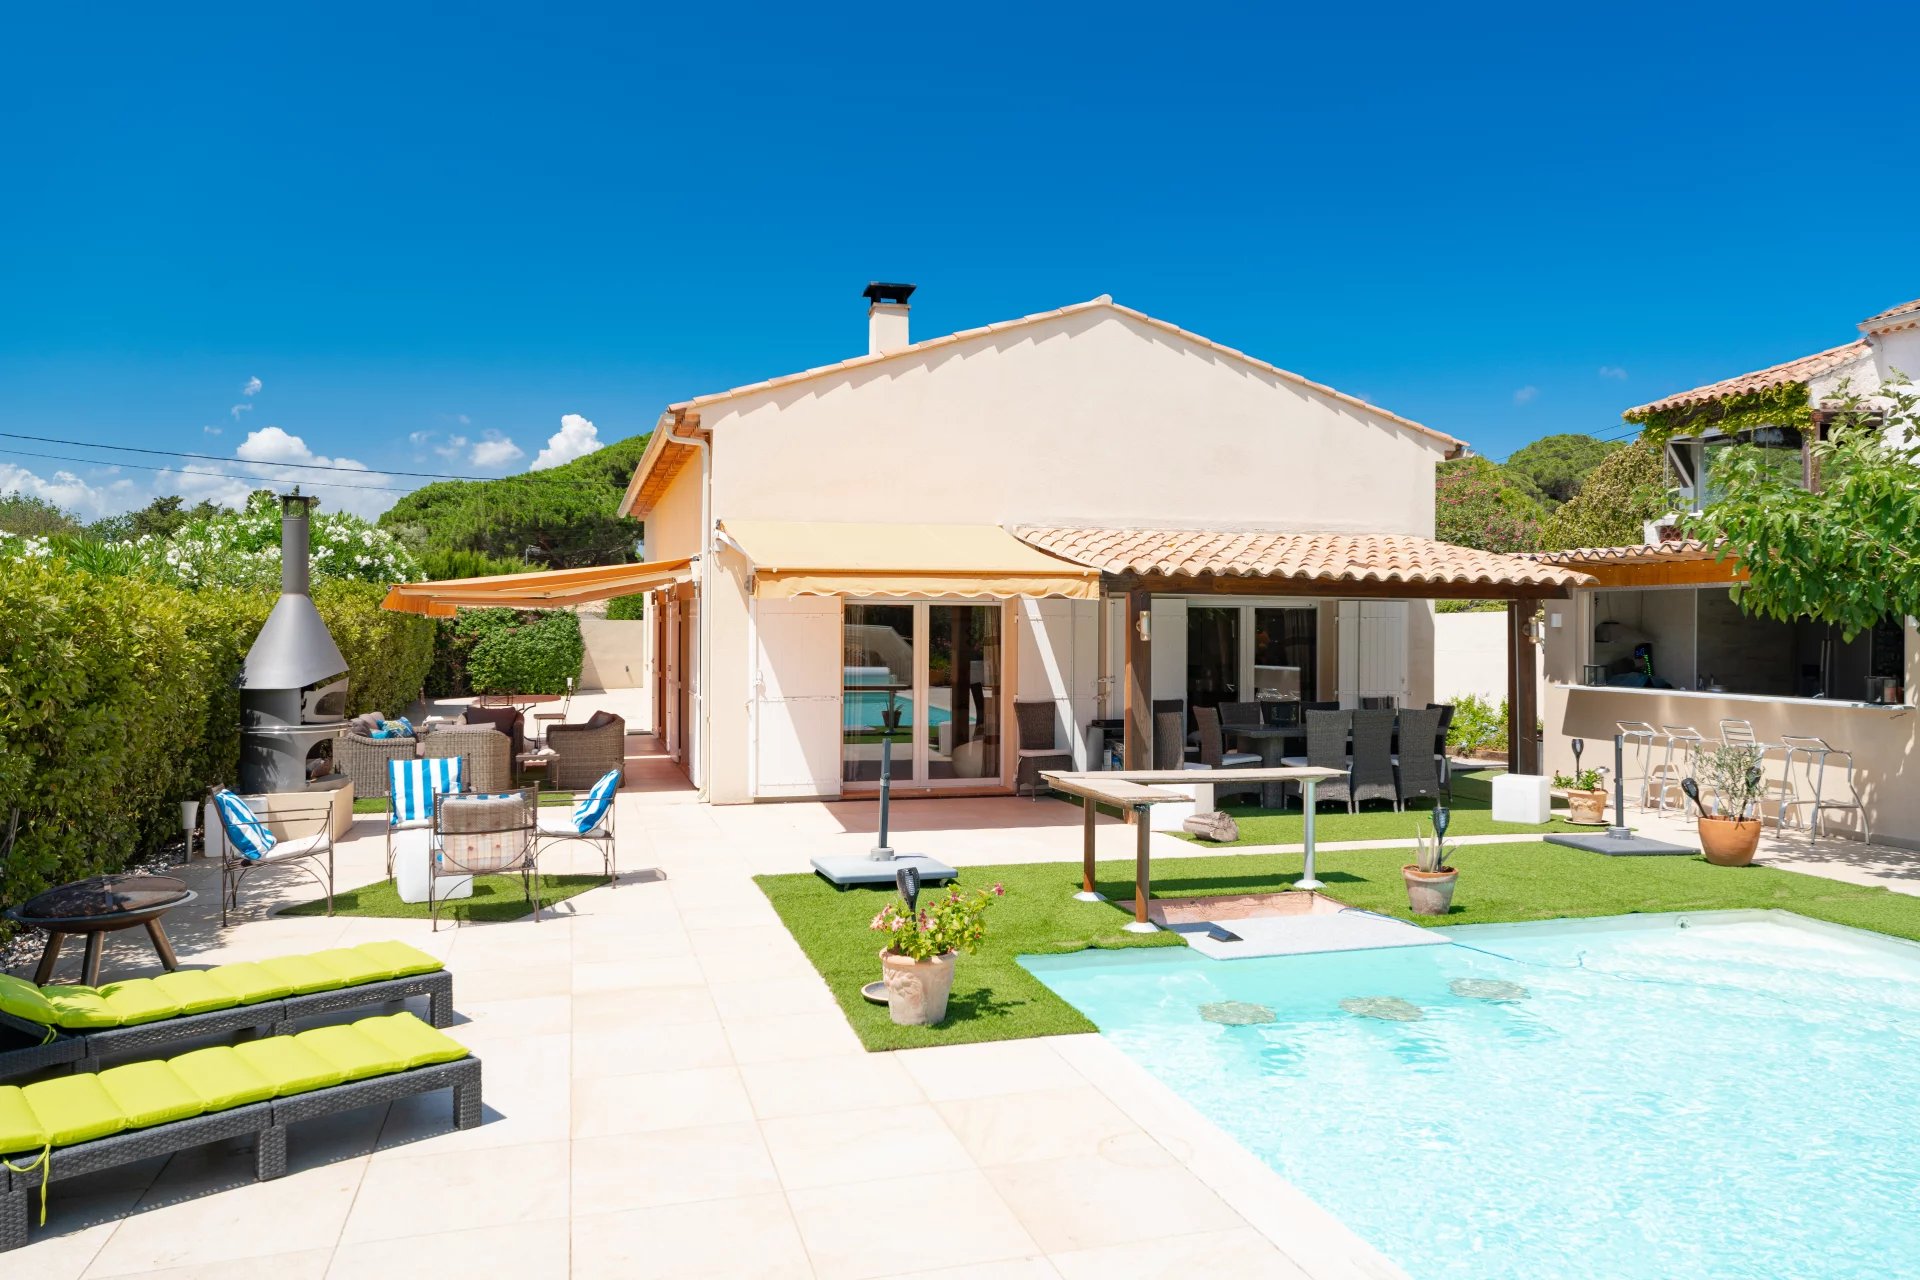 Villa ideally located in Saint-Tropez and close to the beaches.